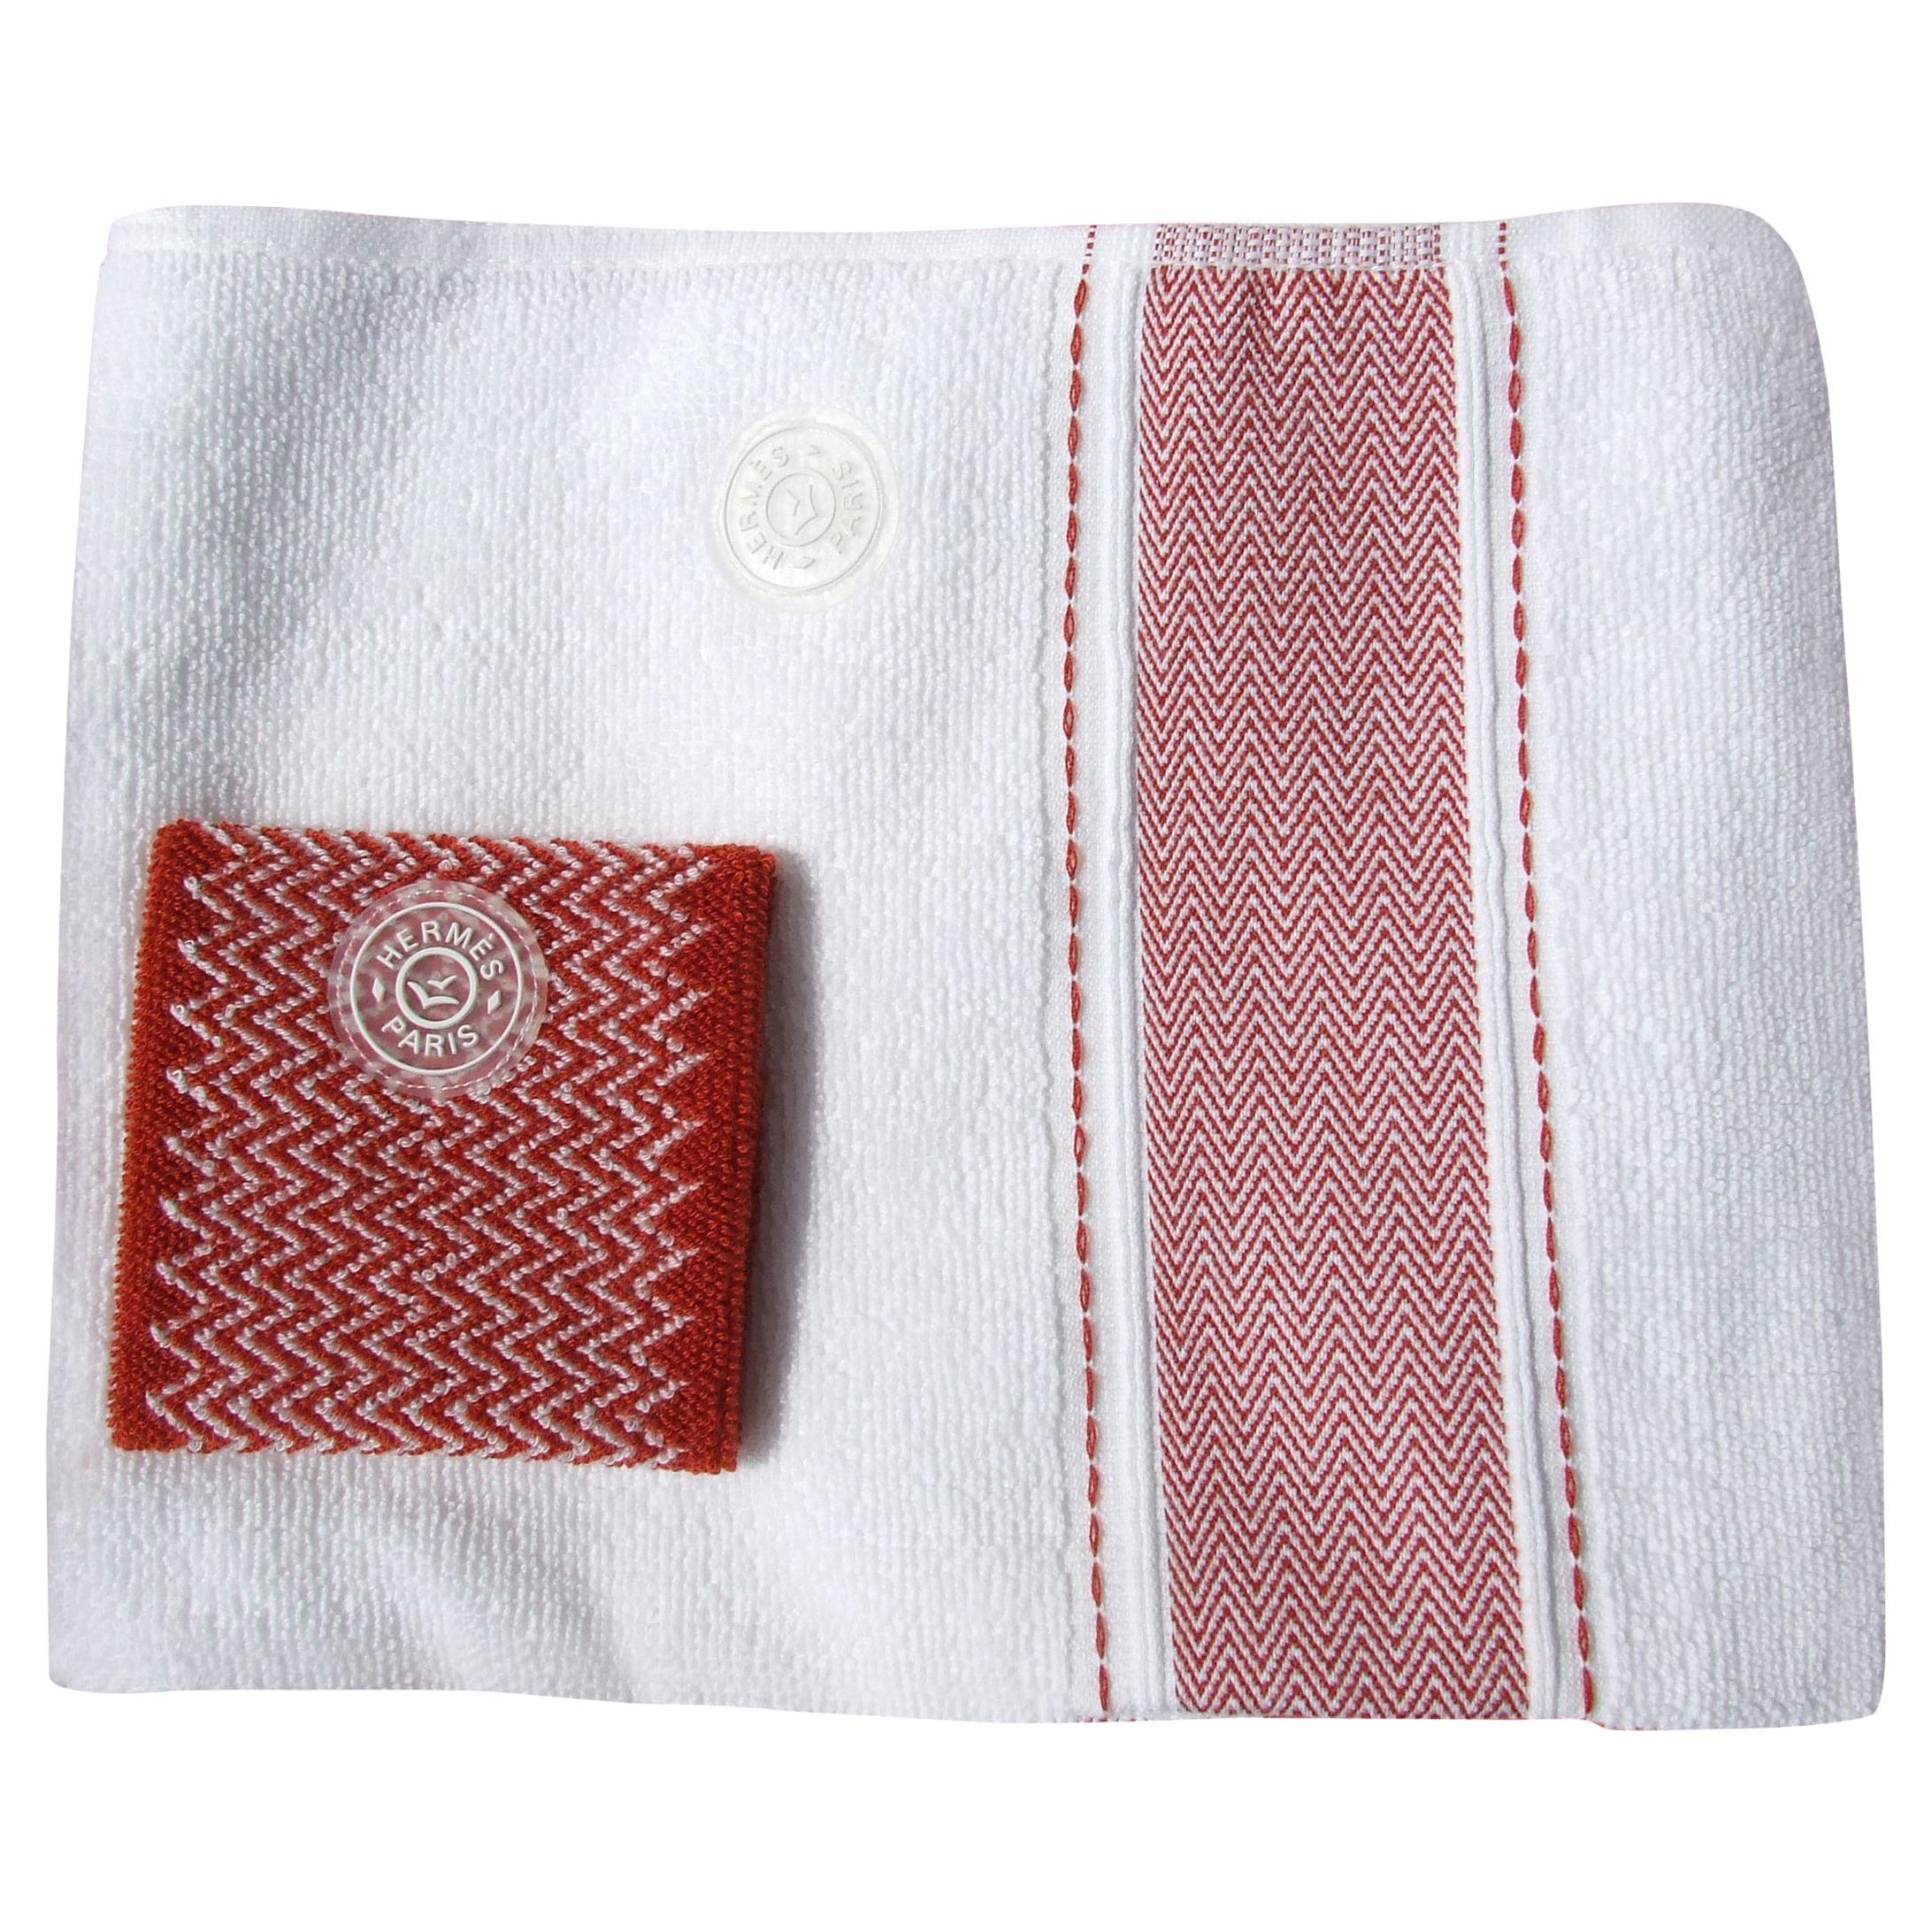 Hermès Set of Sports Towel and Sweatband Tennis Combed Cotton 